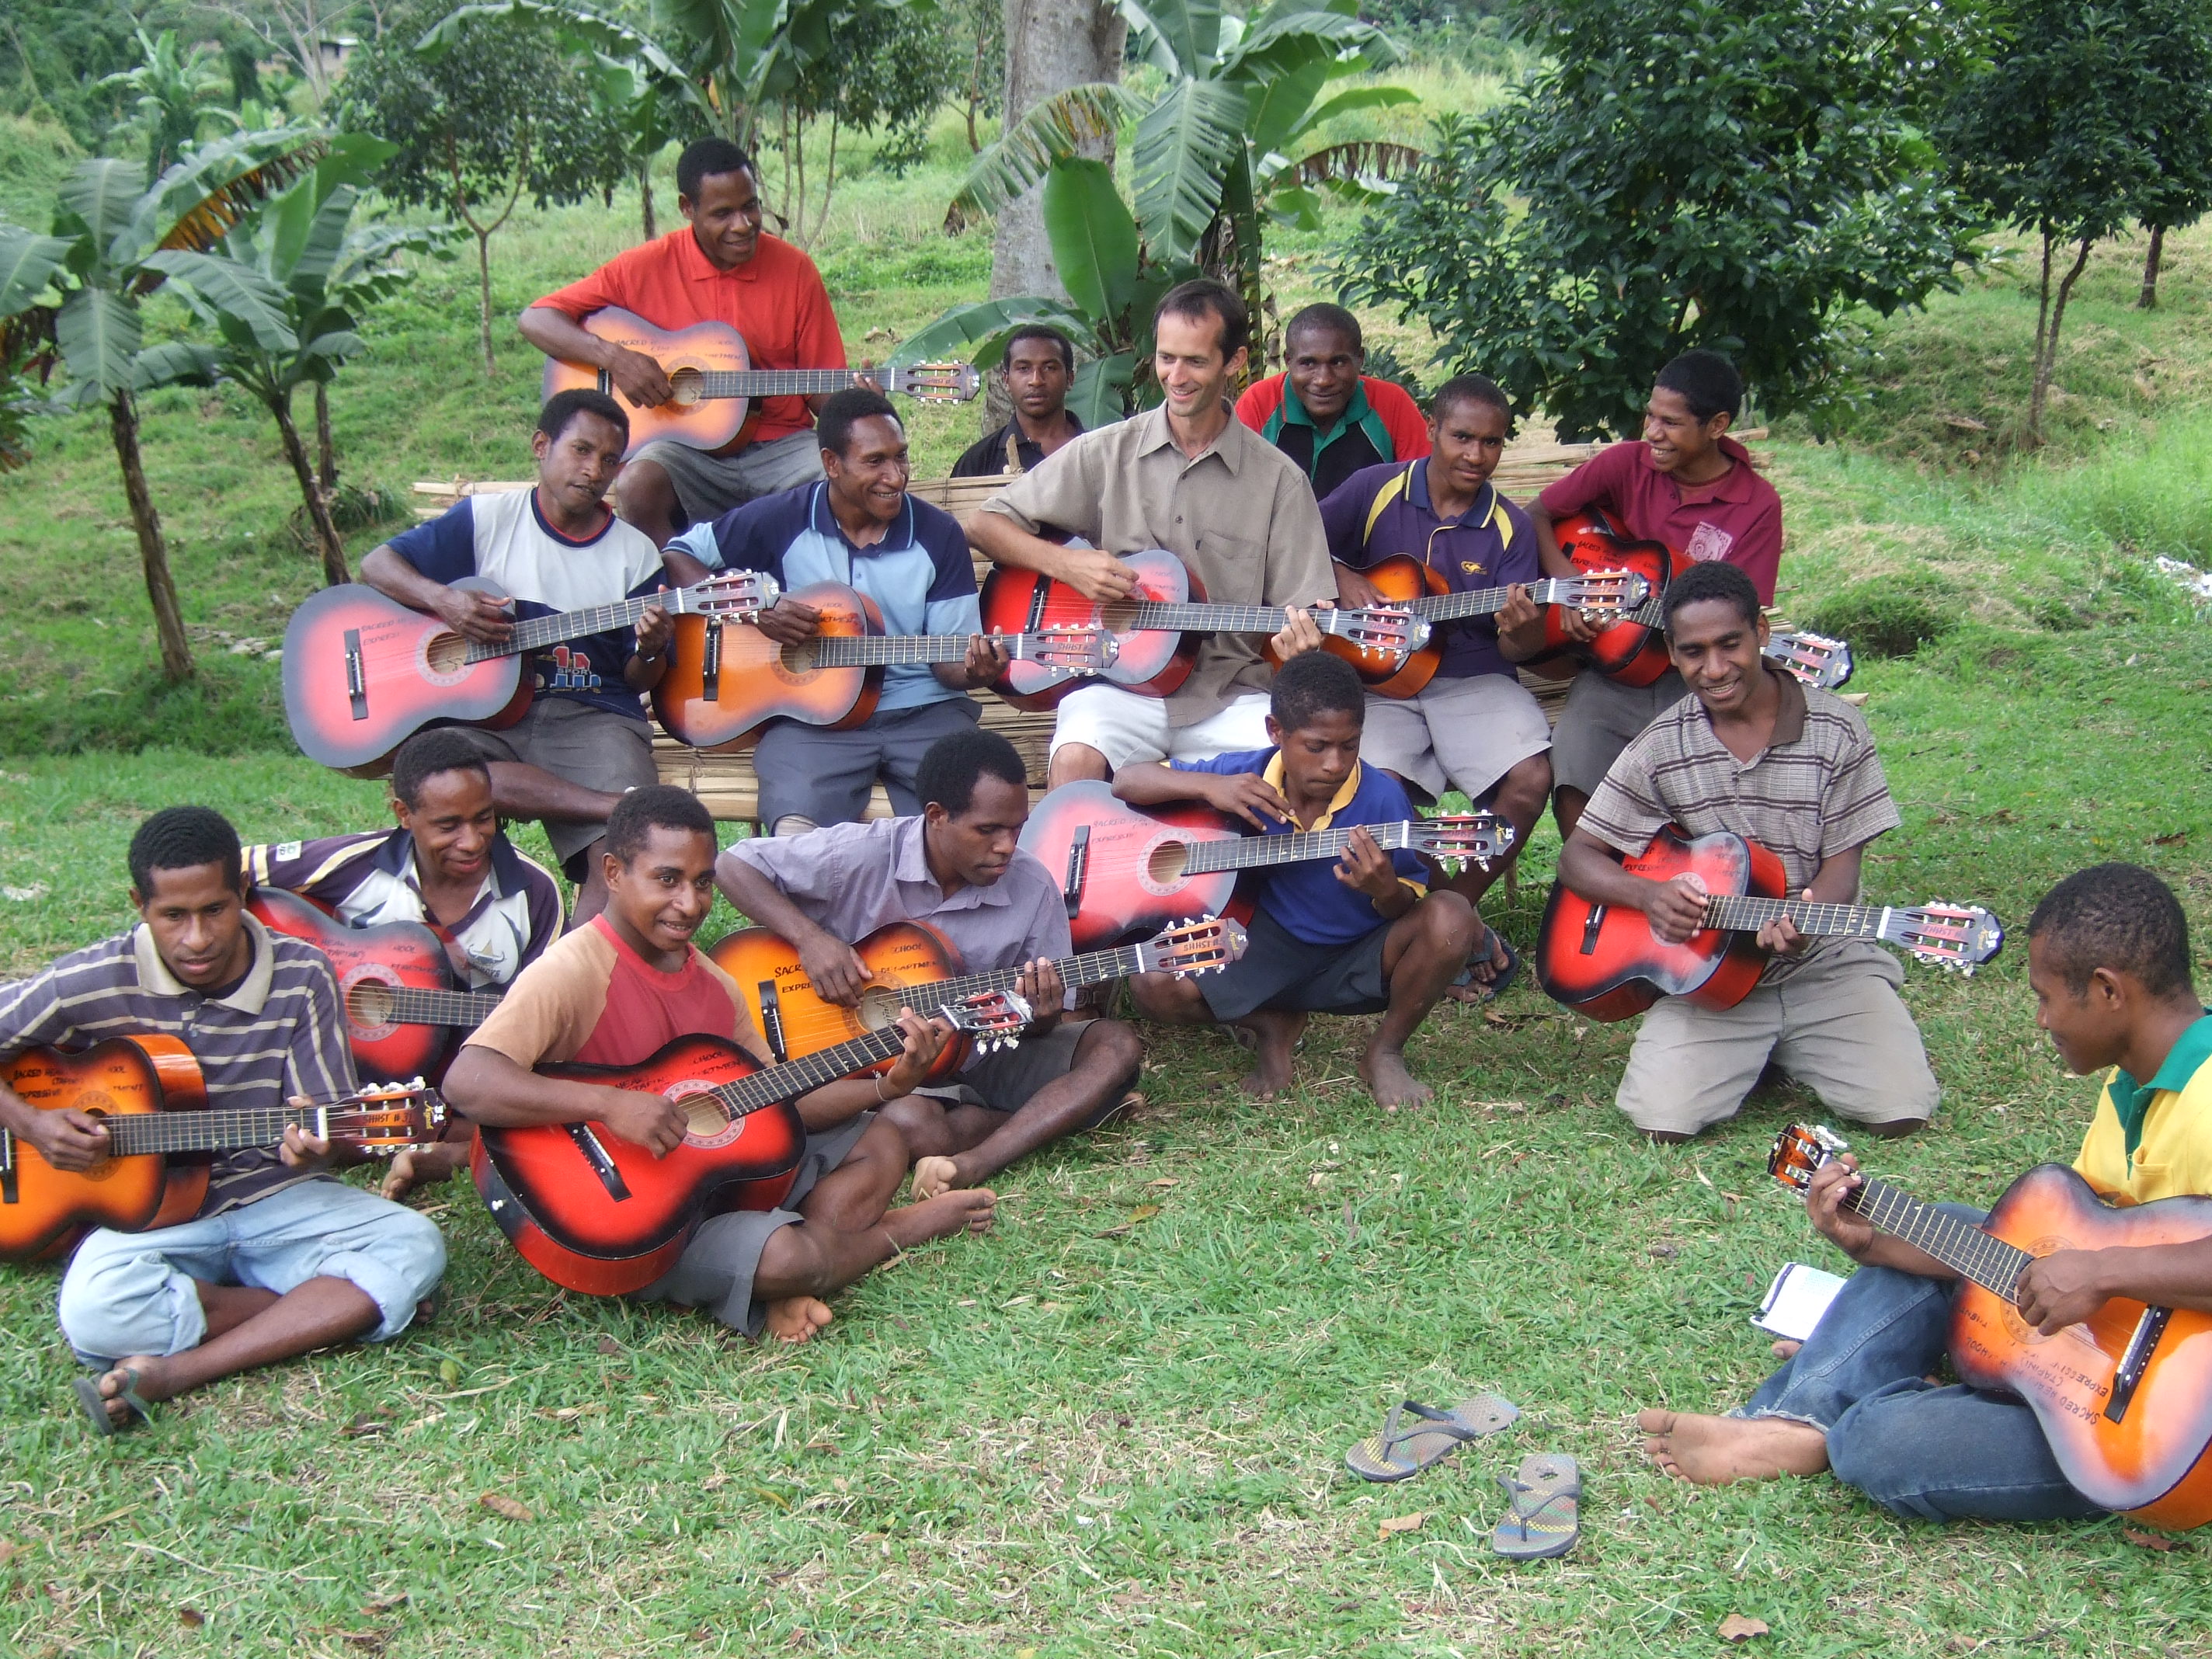 Tony and students playing guitars in Papua New Guinea